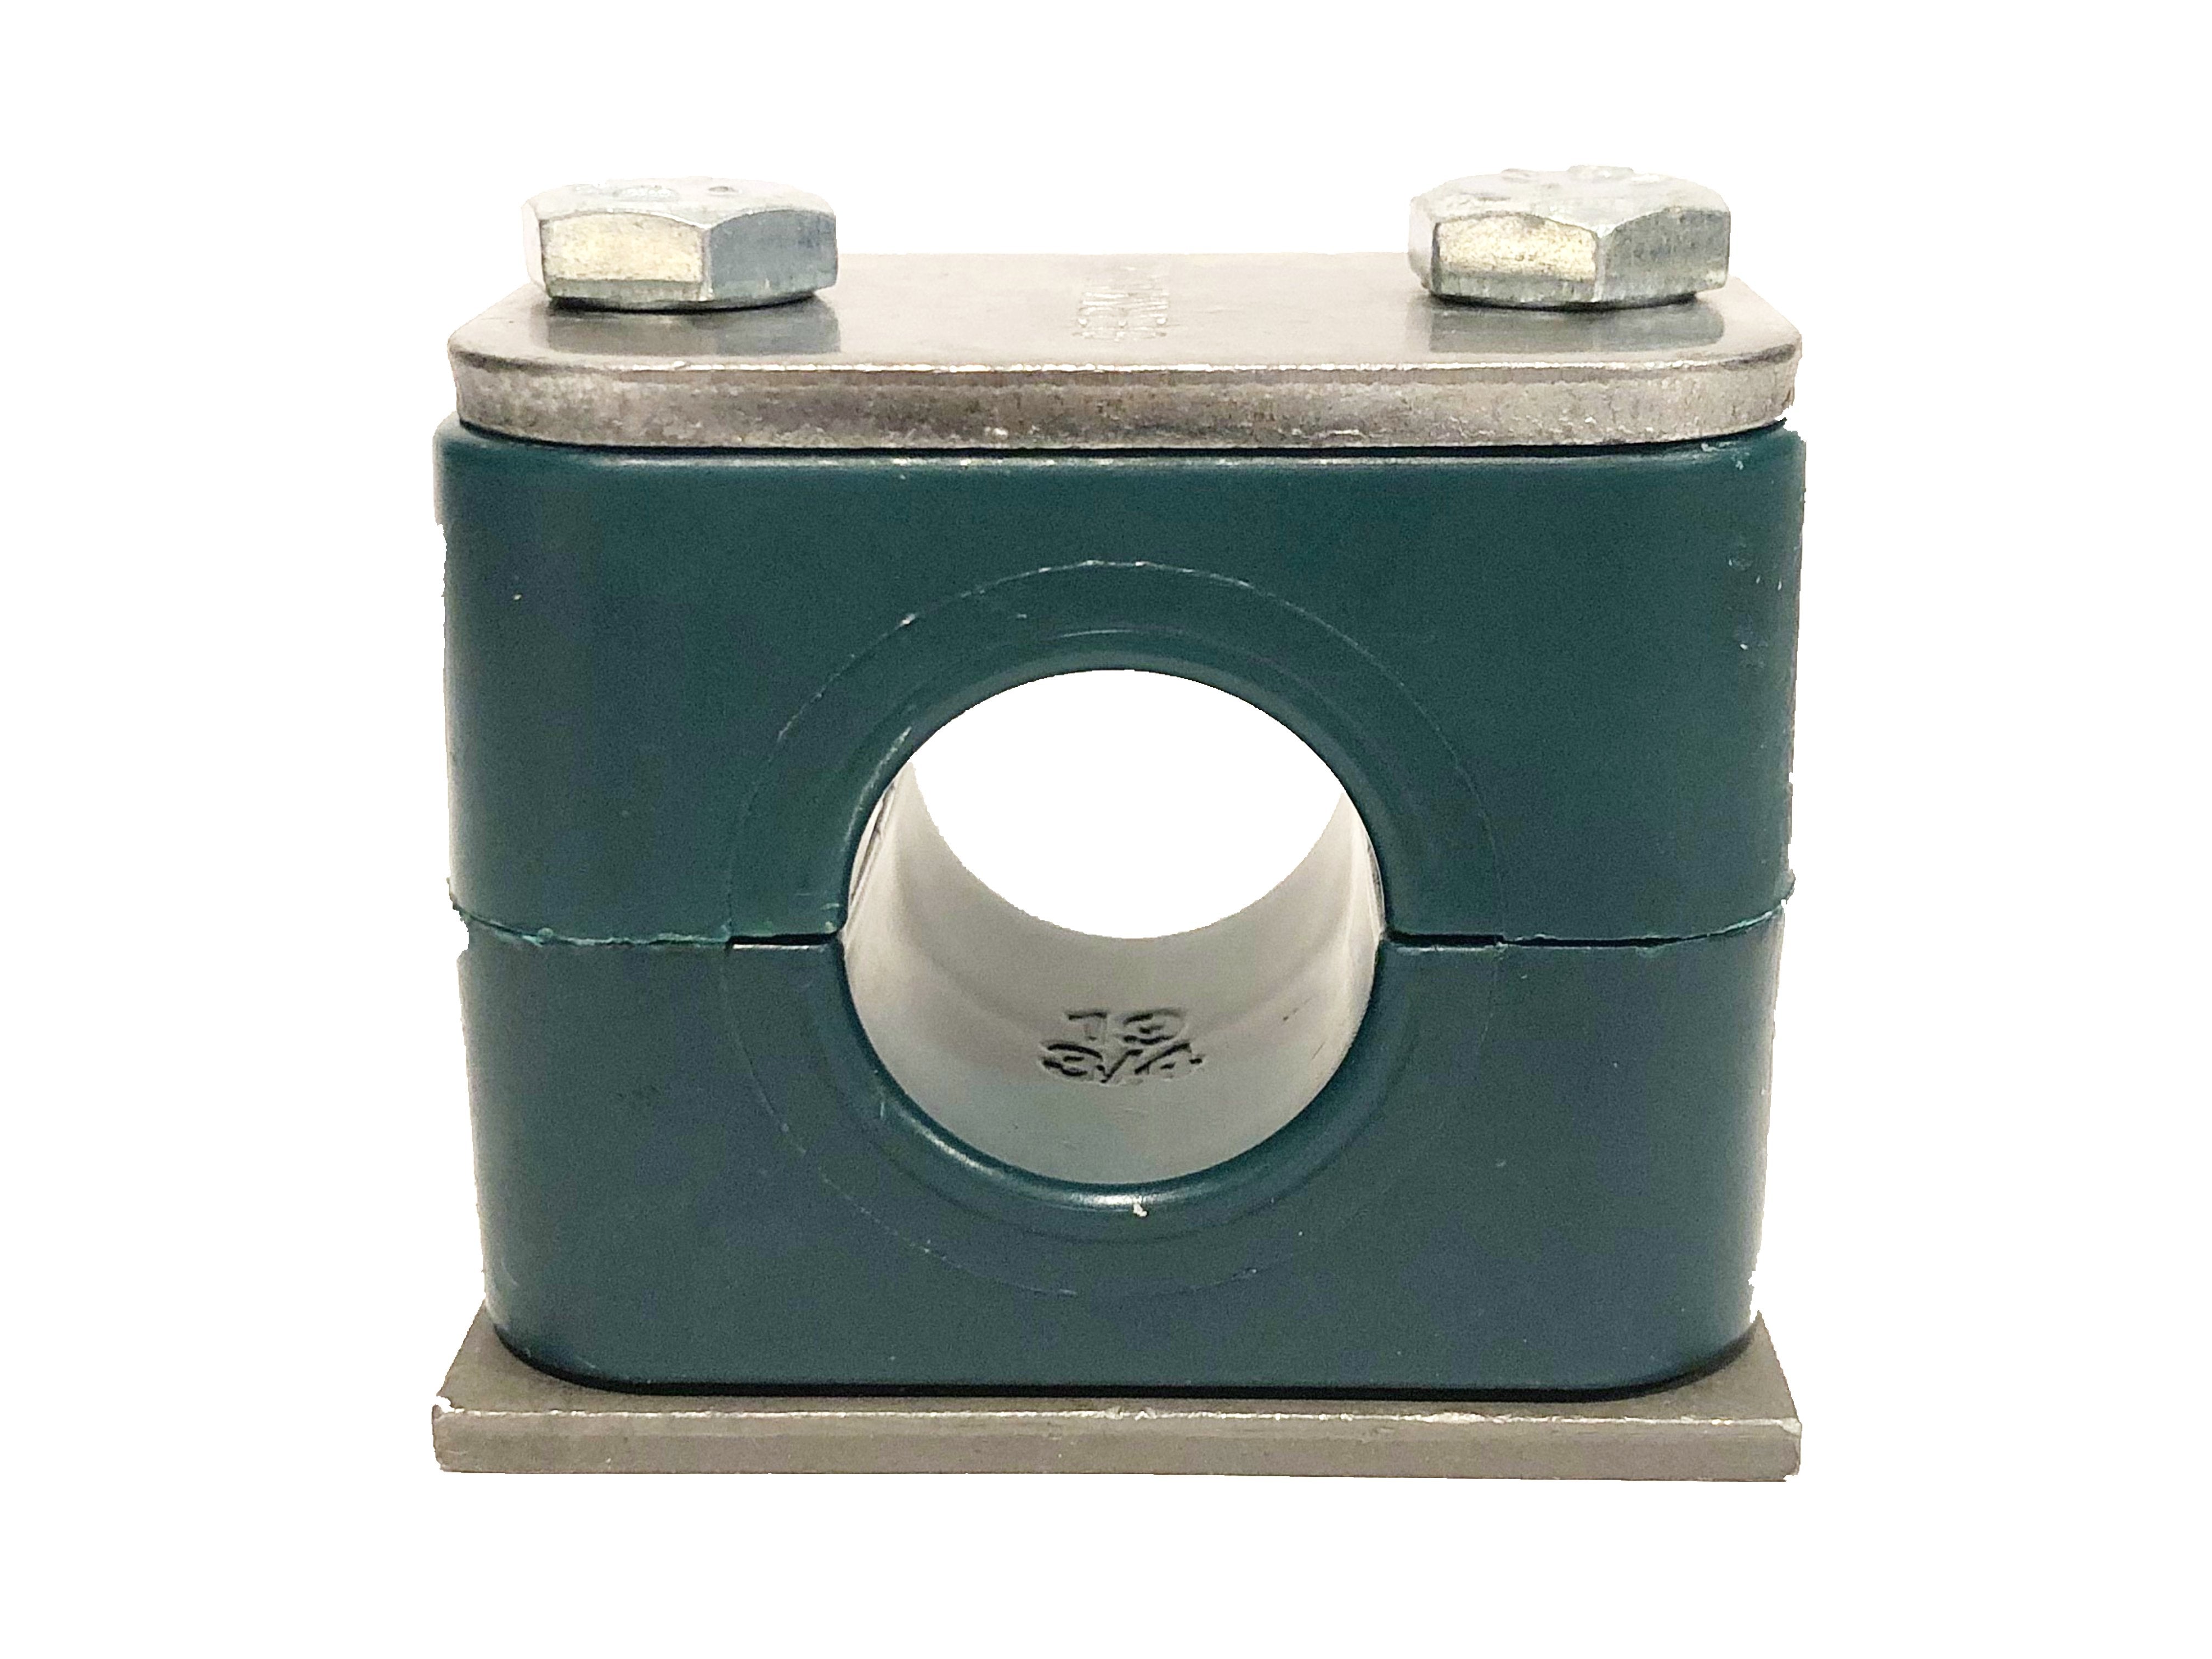 SP-321.3-PP-H-DP-AS-U-W10 : Stauff Clamp, Single Weld Plate, 0.84" (21.3mm) OD, for 1/2" Pipe, Green PP Insert, Smooth Interior, Carbon Steel